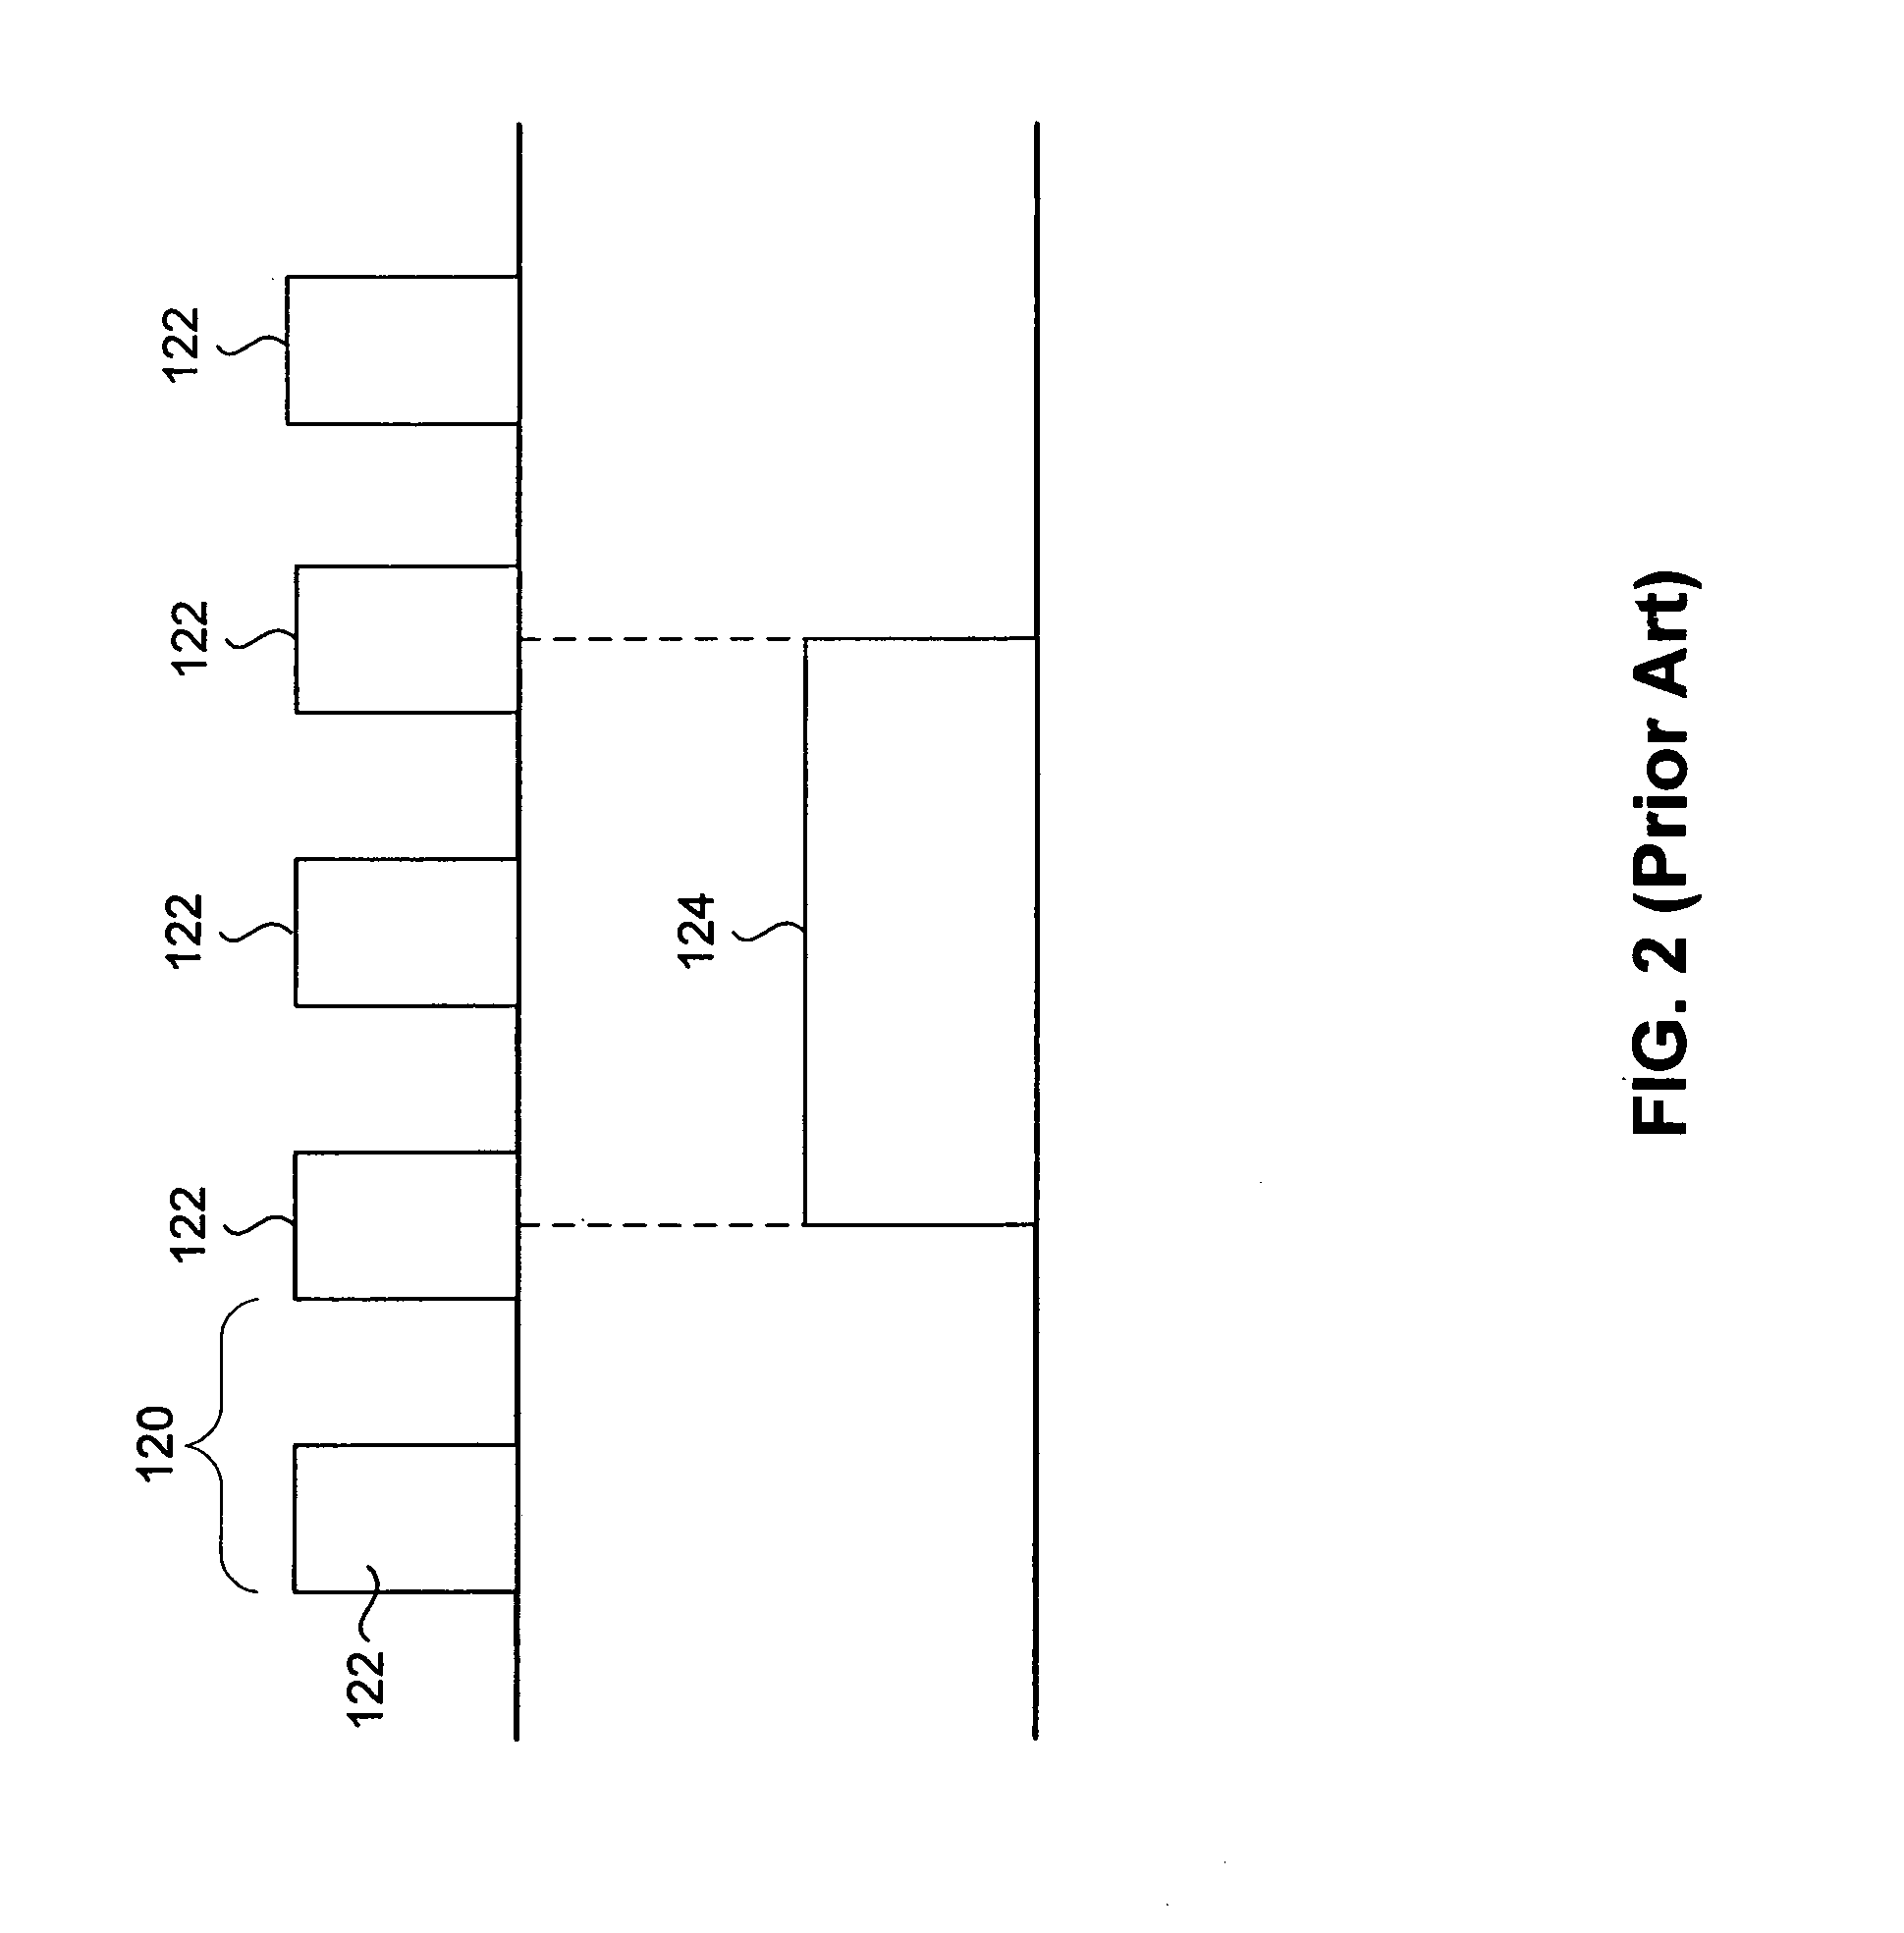 Method and apparatus for co-location of two radio frequency devices